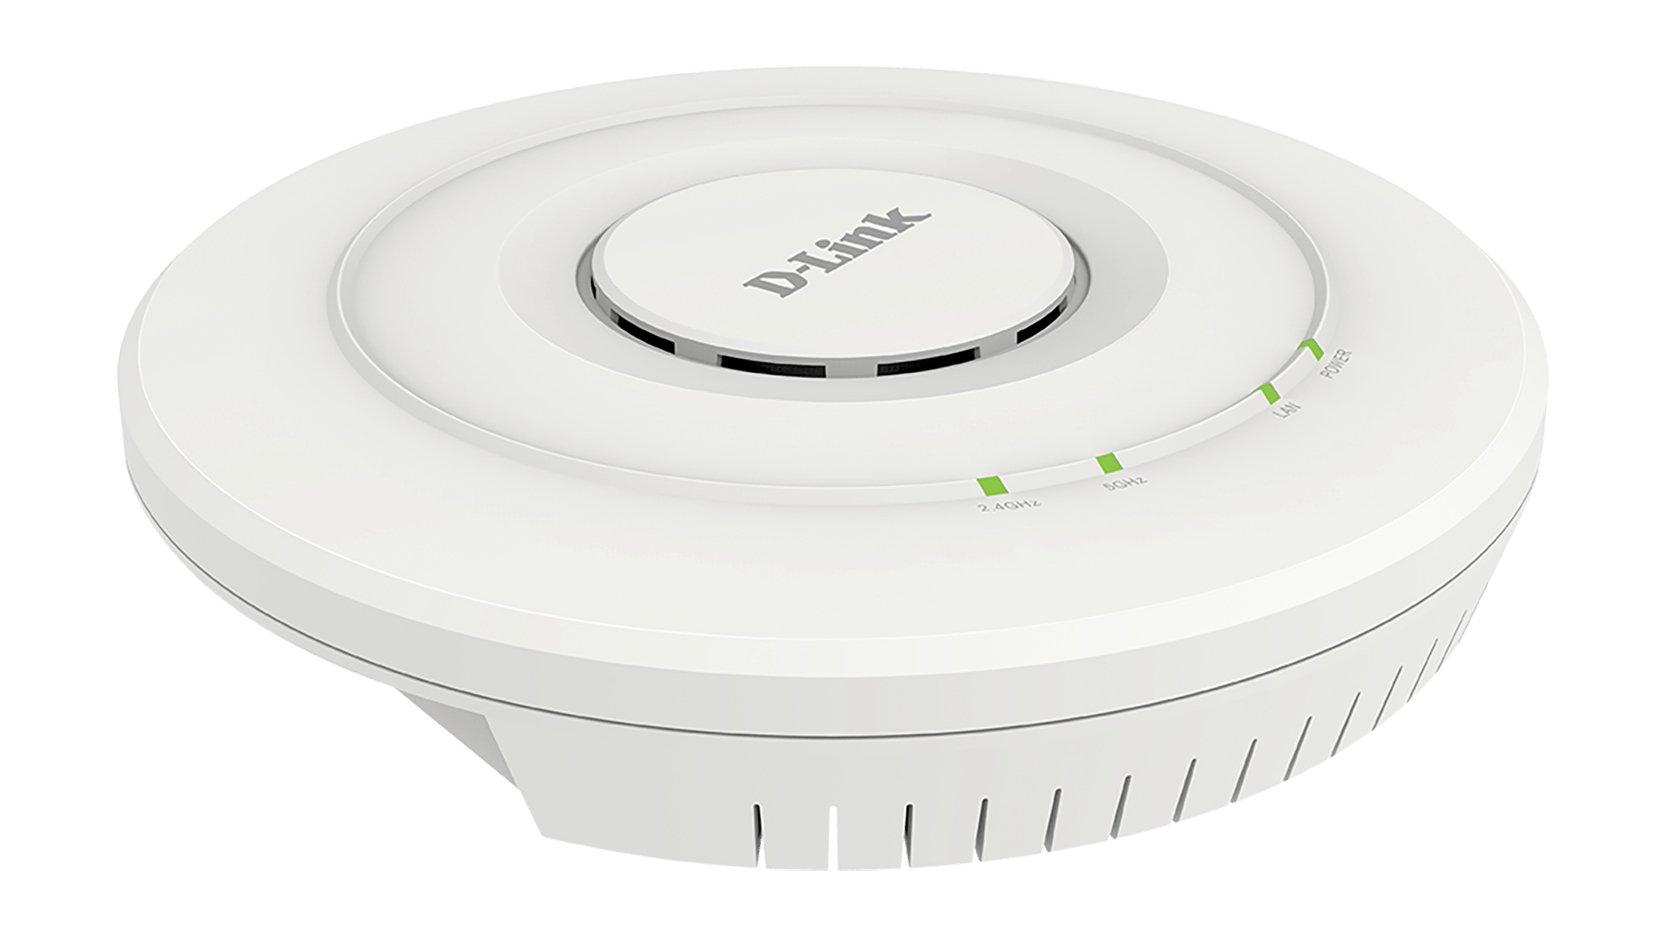 D-Link  UNIFIED AC1200 ACCESS POINT 